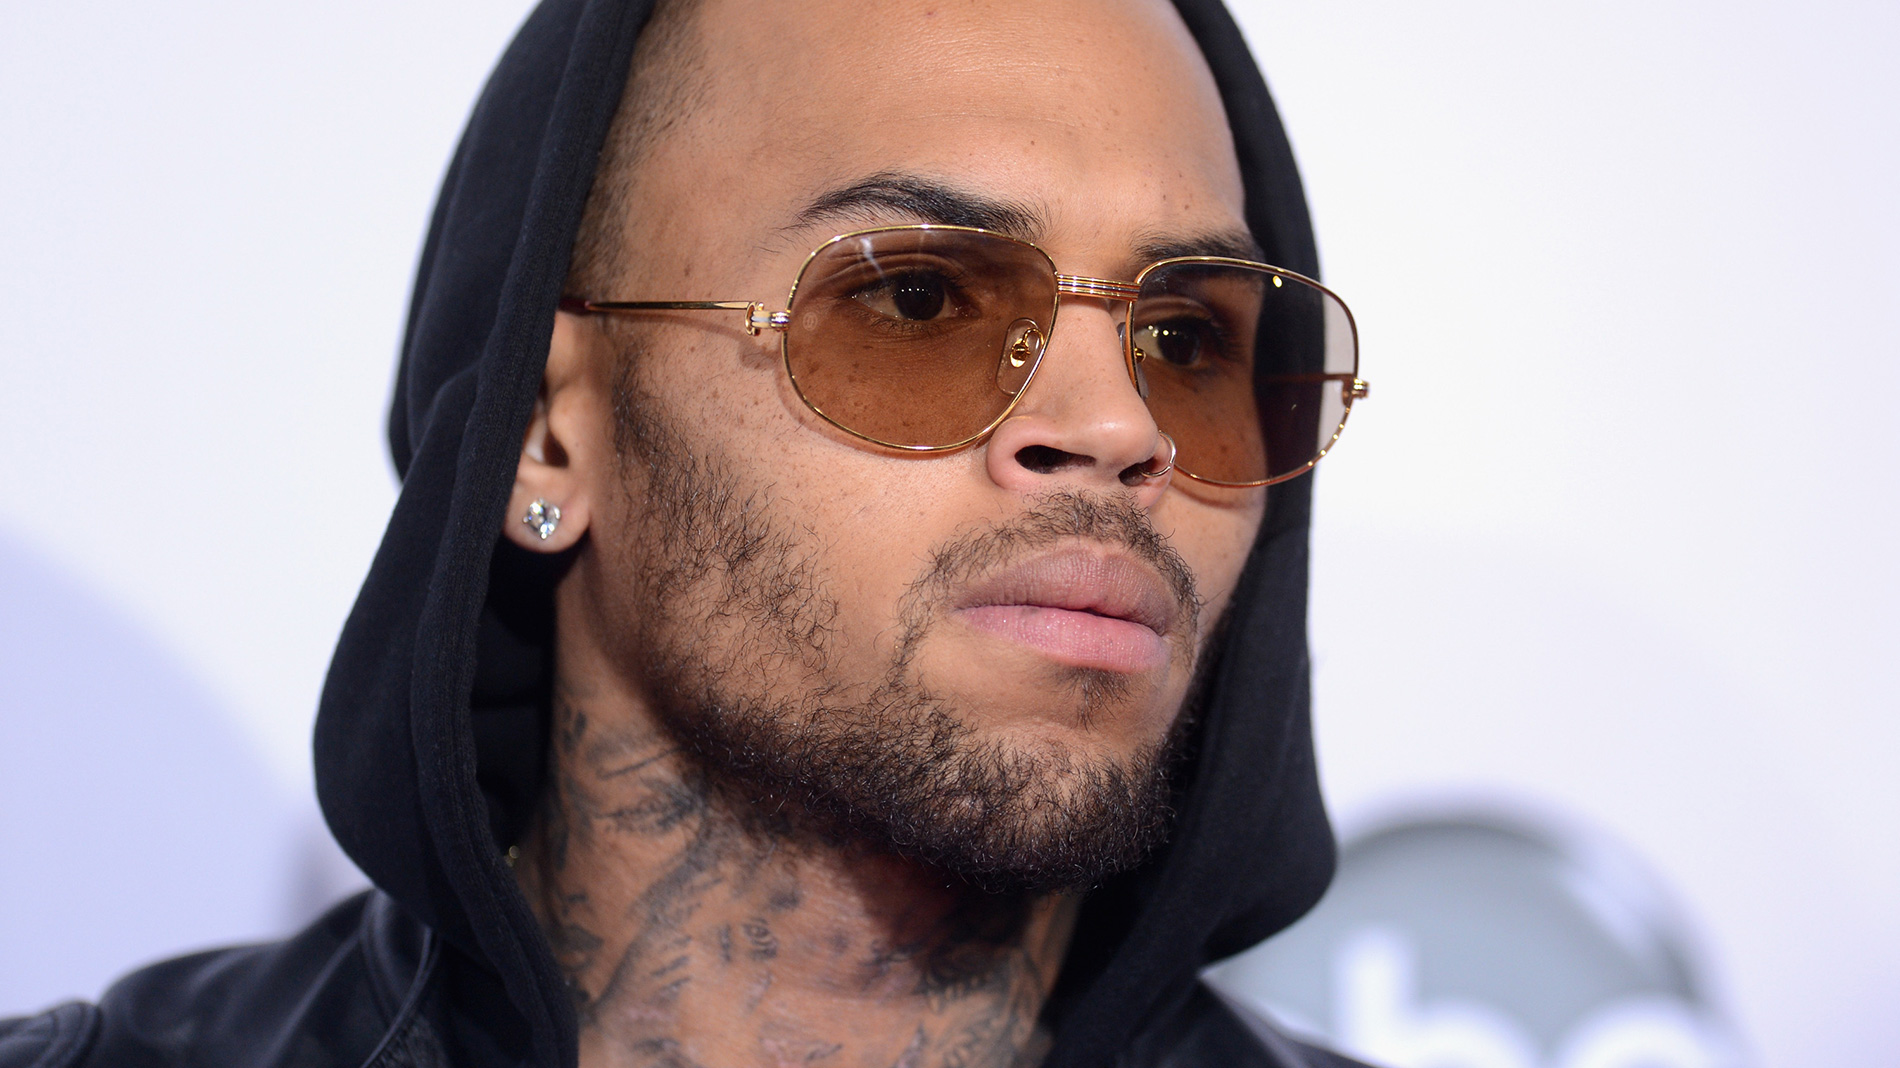 Chris Brown In Jail For…?